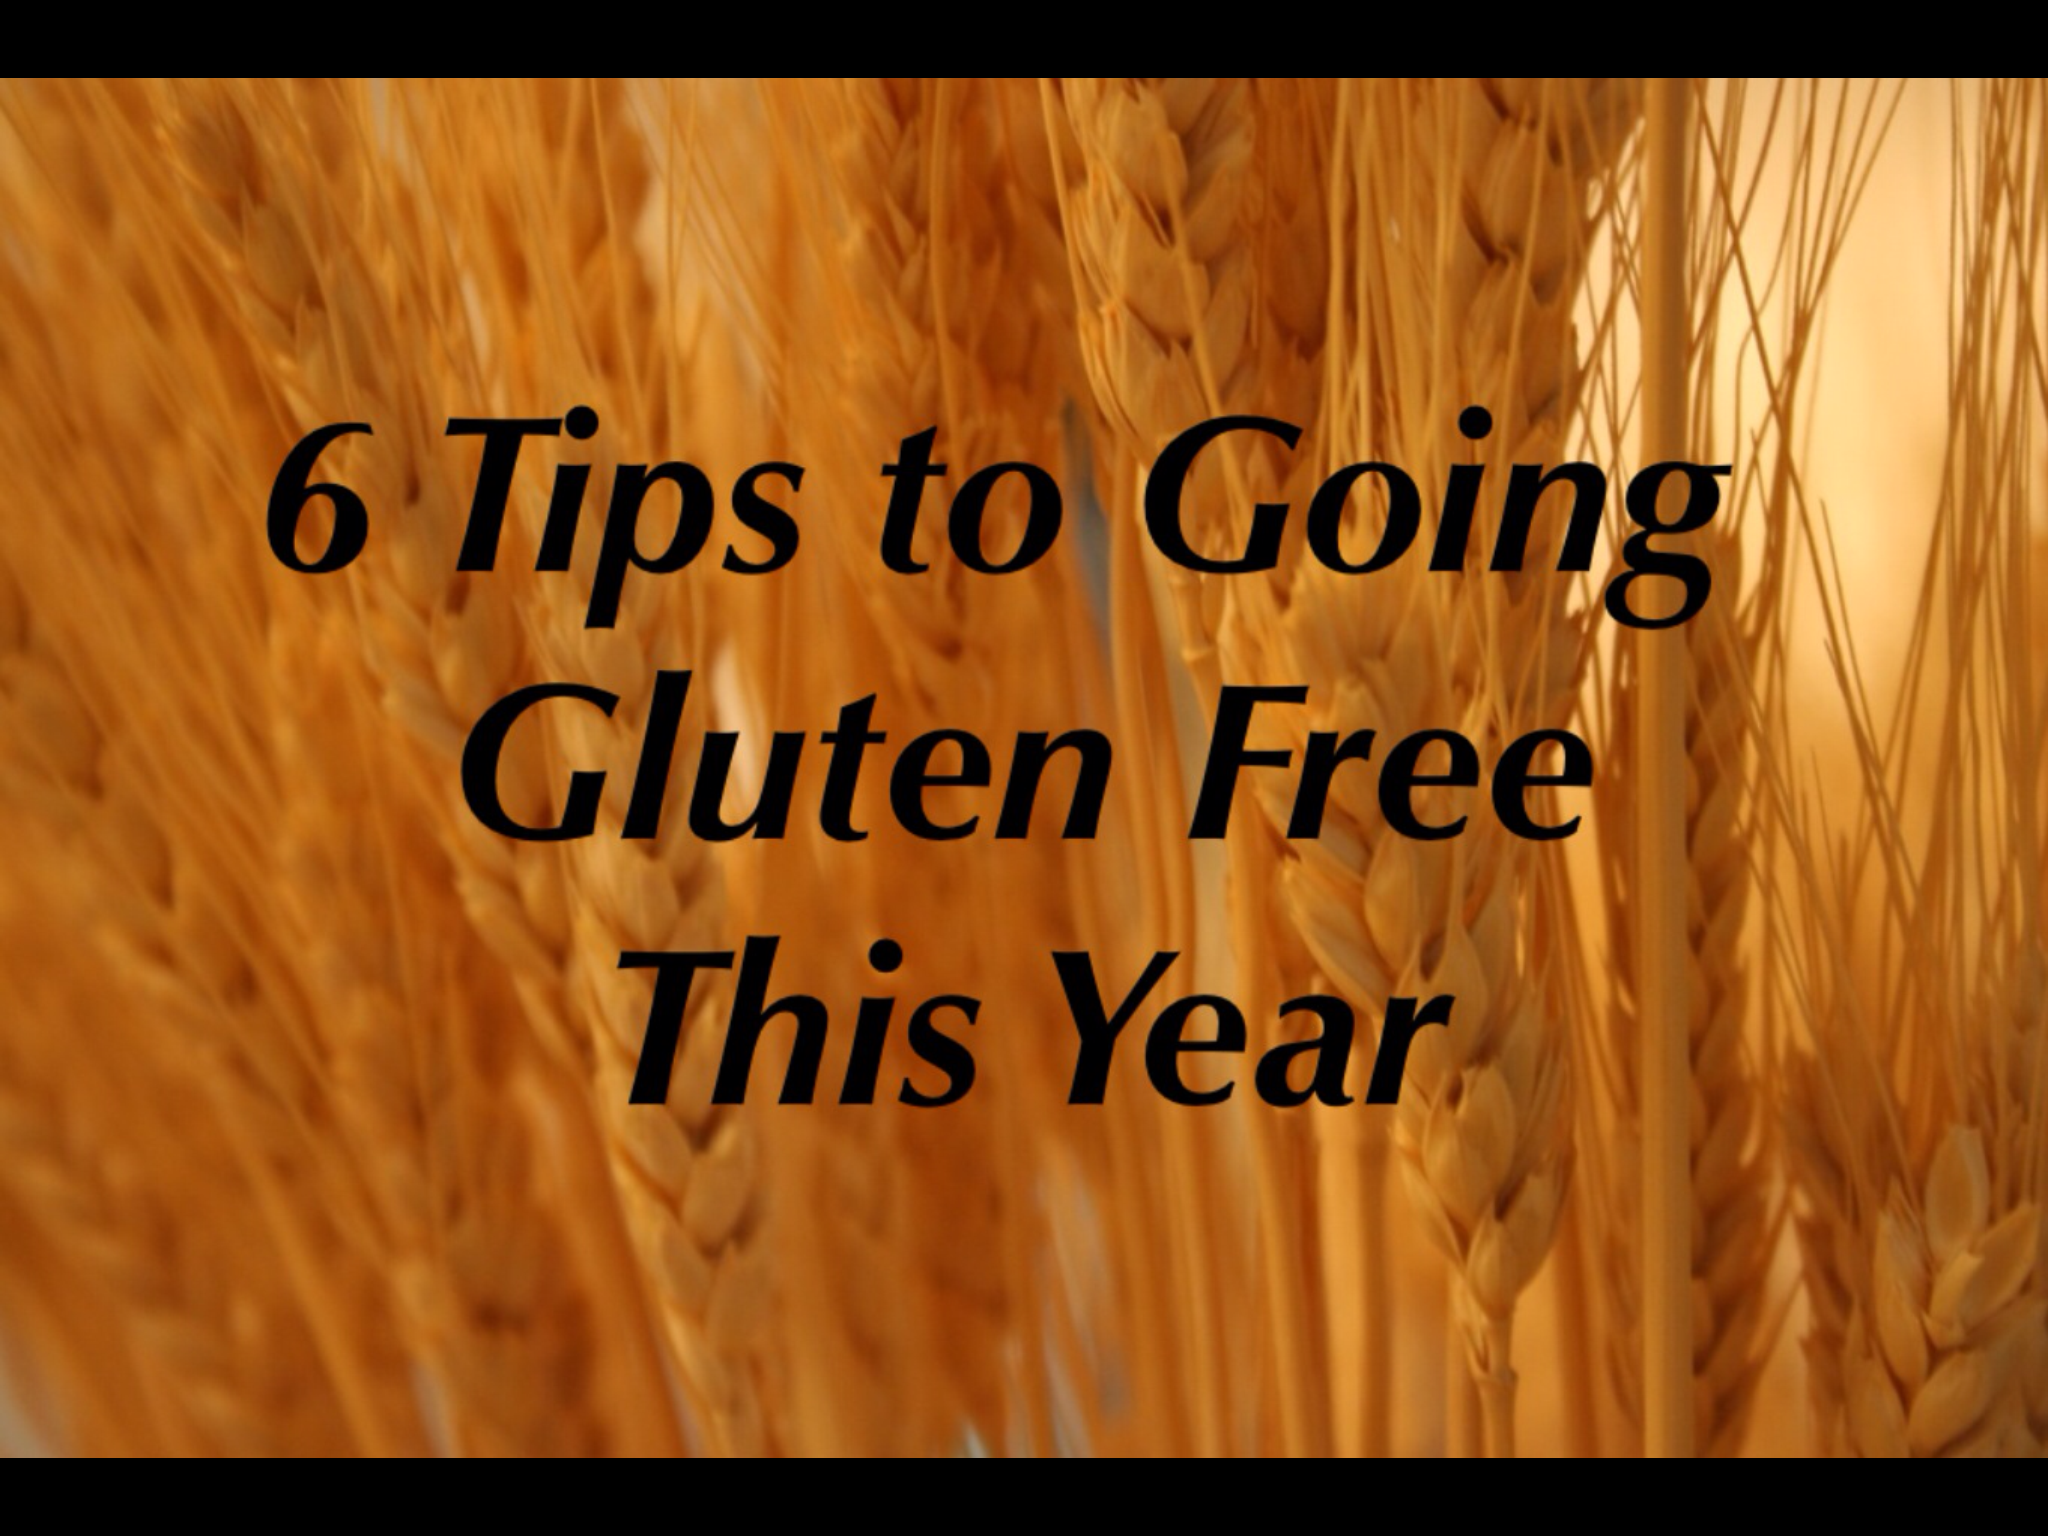 6 Tips to Going Gluten Free This Year